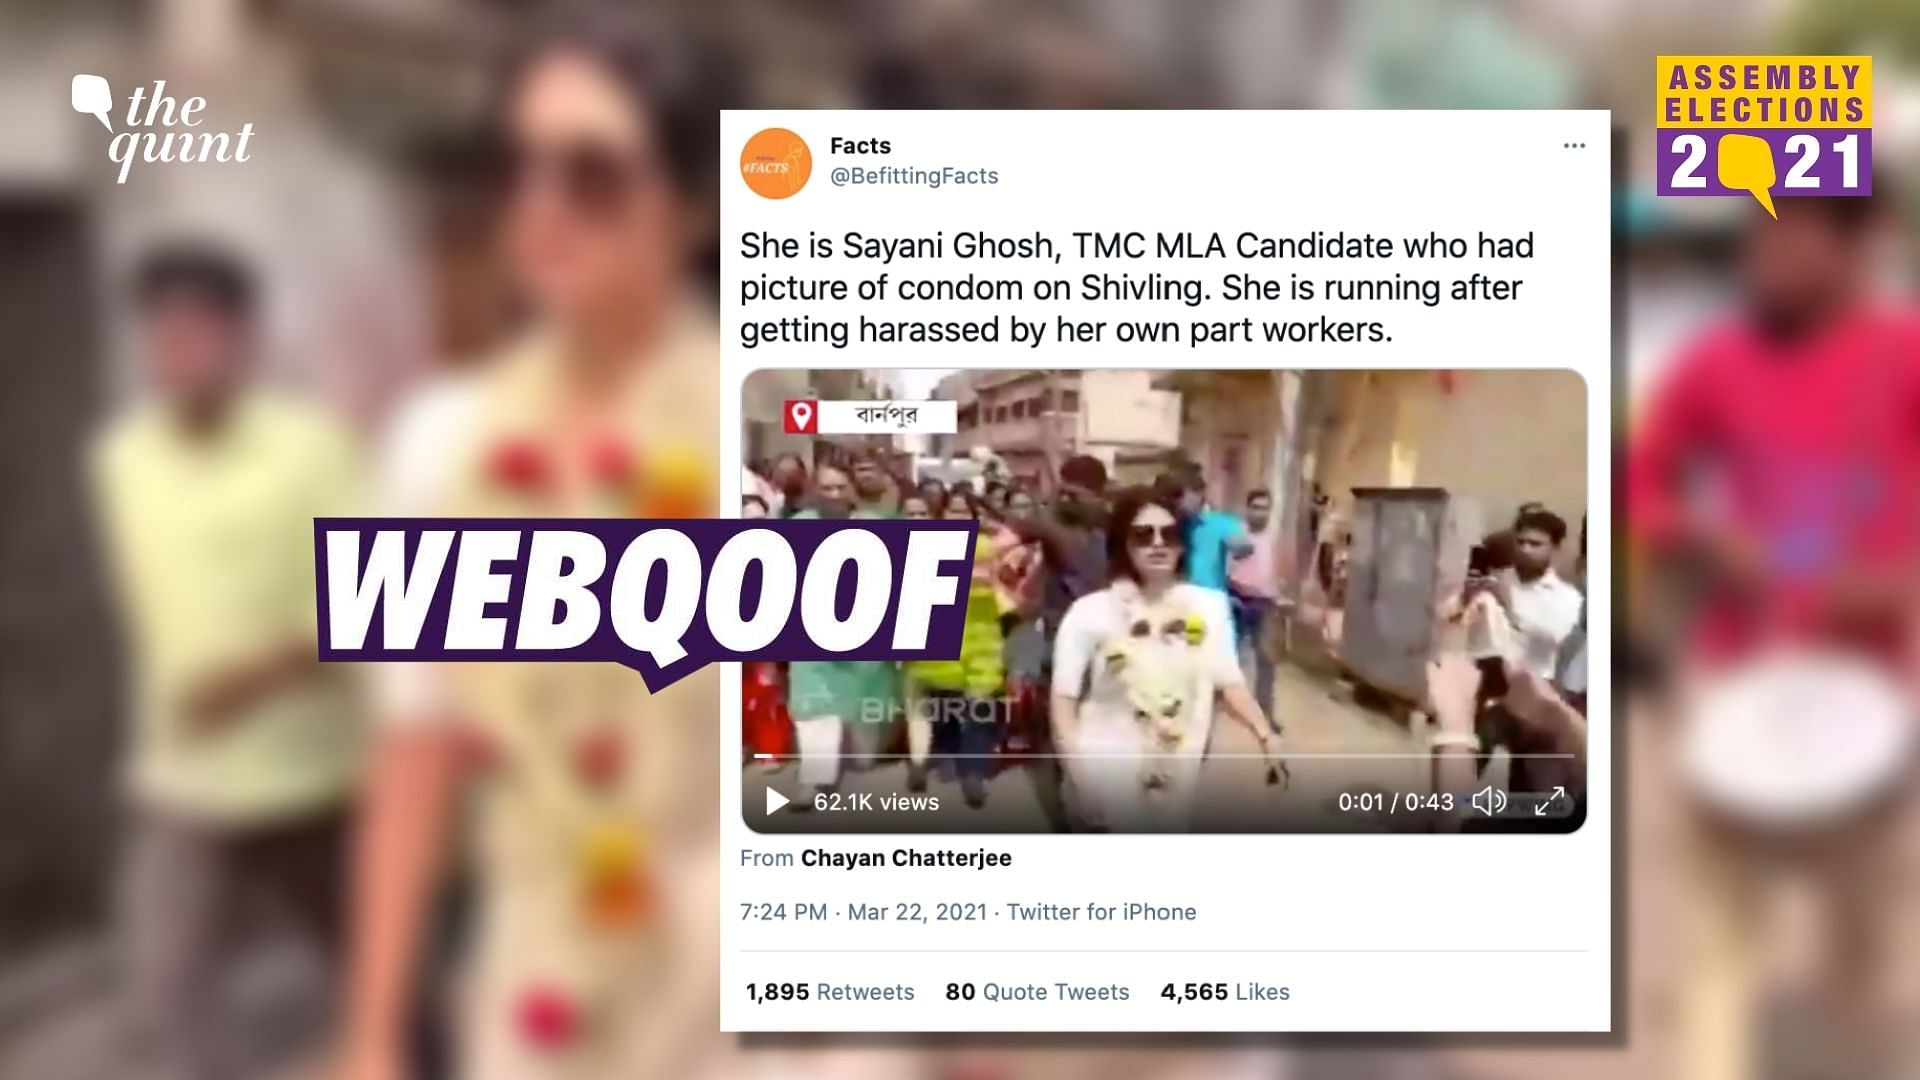 Visuals of Trinamool Congress candidate Saayoni Ghosh running during her campaign trail were shared with the false claim that she was “harassed by her own party members”.